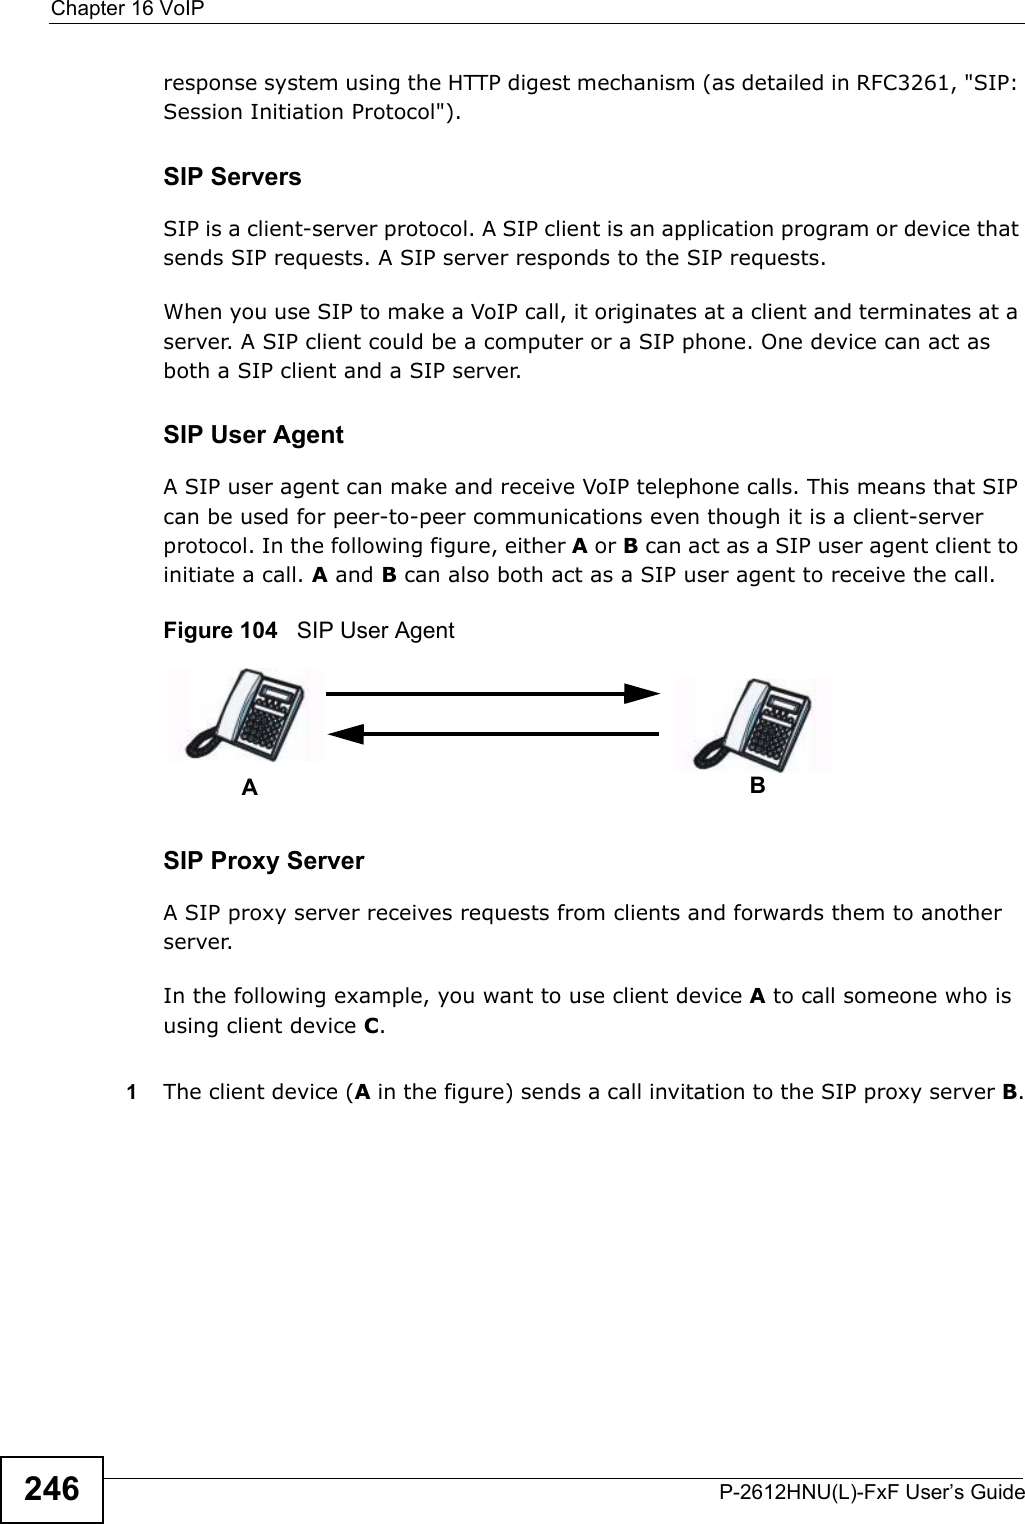 Chapter 16 VoIPP-2612HNU(L)-FxF User’s Guide246response system using the HTTP digest mechanism (as detailed in RFC3261, &quot;SIP:Session Initiation Protocol&quot;).SIP ServersSIP is a client-server protocol. A SIP client is an application program or device thatsends SIP requests. A SIP server responds to the SIP requests.When you use SIP to make a VoIP call, it originates at a client and terminates at a server. A SIP client could be a computer or a SIP phone. One device can act as both a SIP client and a SIP server. SIP User Agent A SIP user agent can make and receive VoIP telephone calls. This means that SIP can be used for peer-to-peer communications even though it is a client-server protocol. In the following figure, either A or B can act as a SIP user agent client toinitiate a call. A and B can also both act as a SIP user agent to receive the call.Figure 104   SIP User AgentSIP Proxy ServerA SIP proxy server receives requests from clients and forwards them to another server.In the following example, you want to use client device Ato call someone who is using client device C. 1The client device (A in the figure) sends a call invitation to the SIP proxy server B.AB